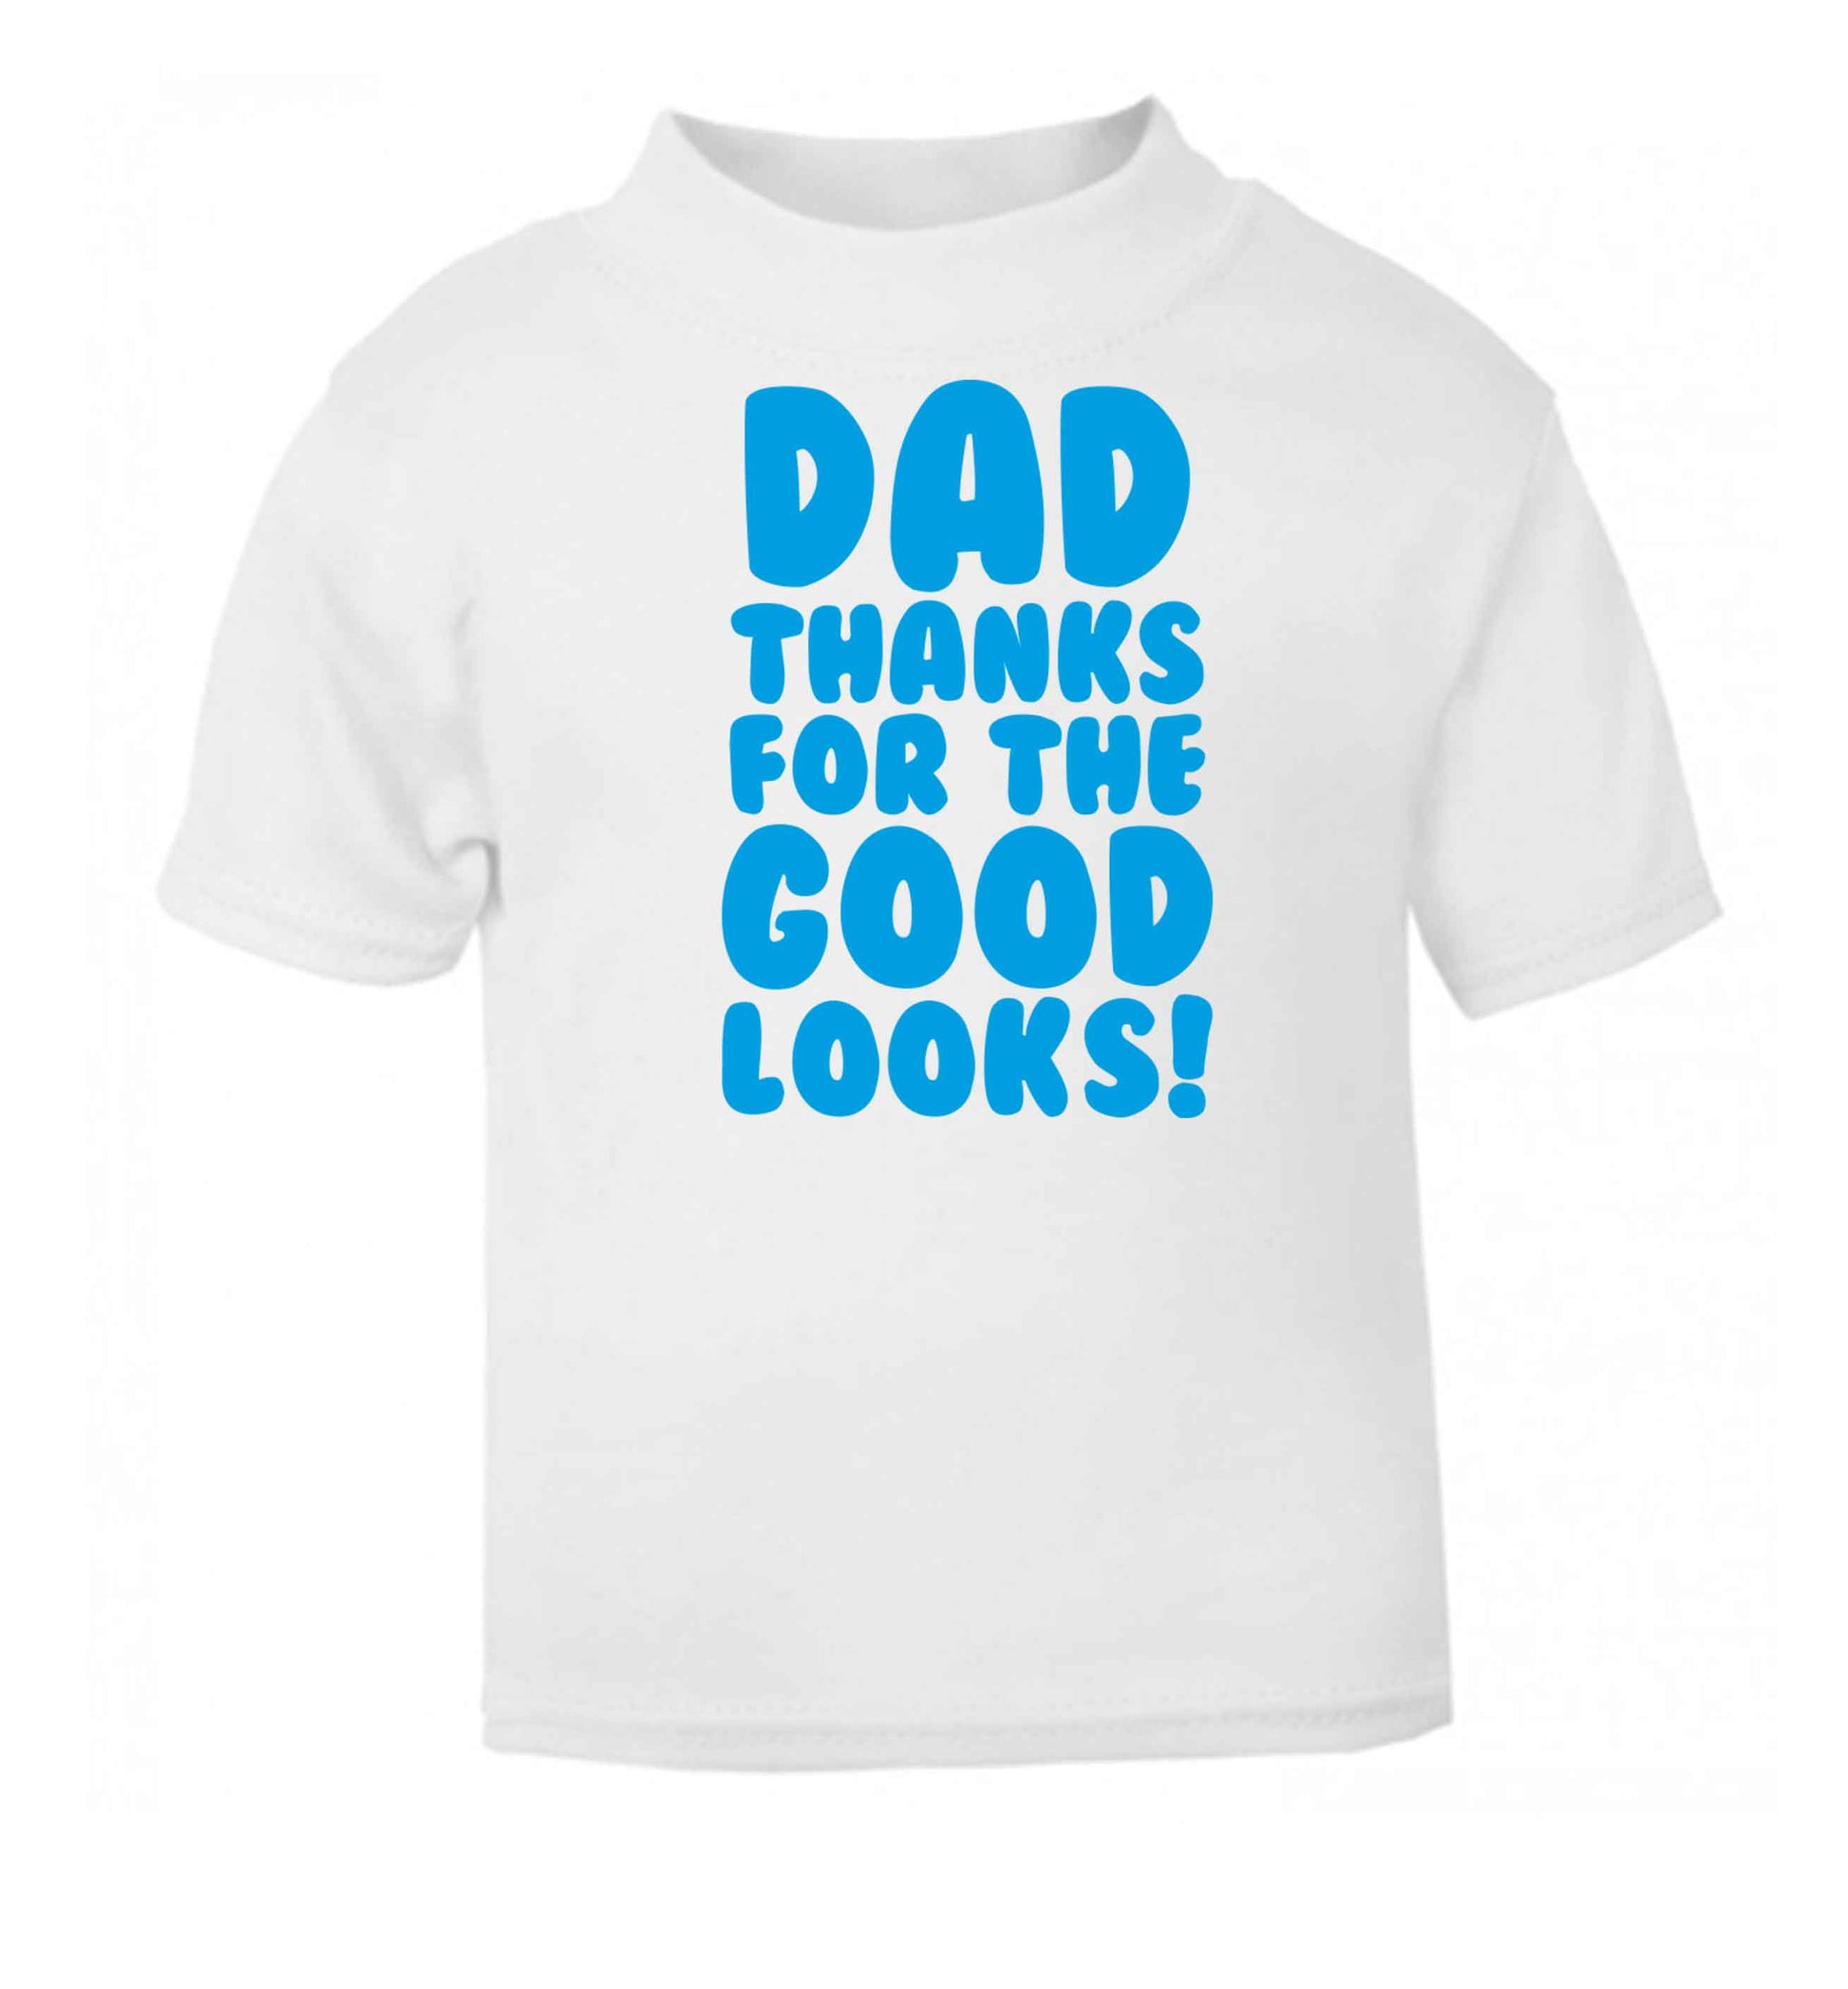 Dad thanks for the good looks white baby toddler Tshirt 2 Years